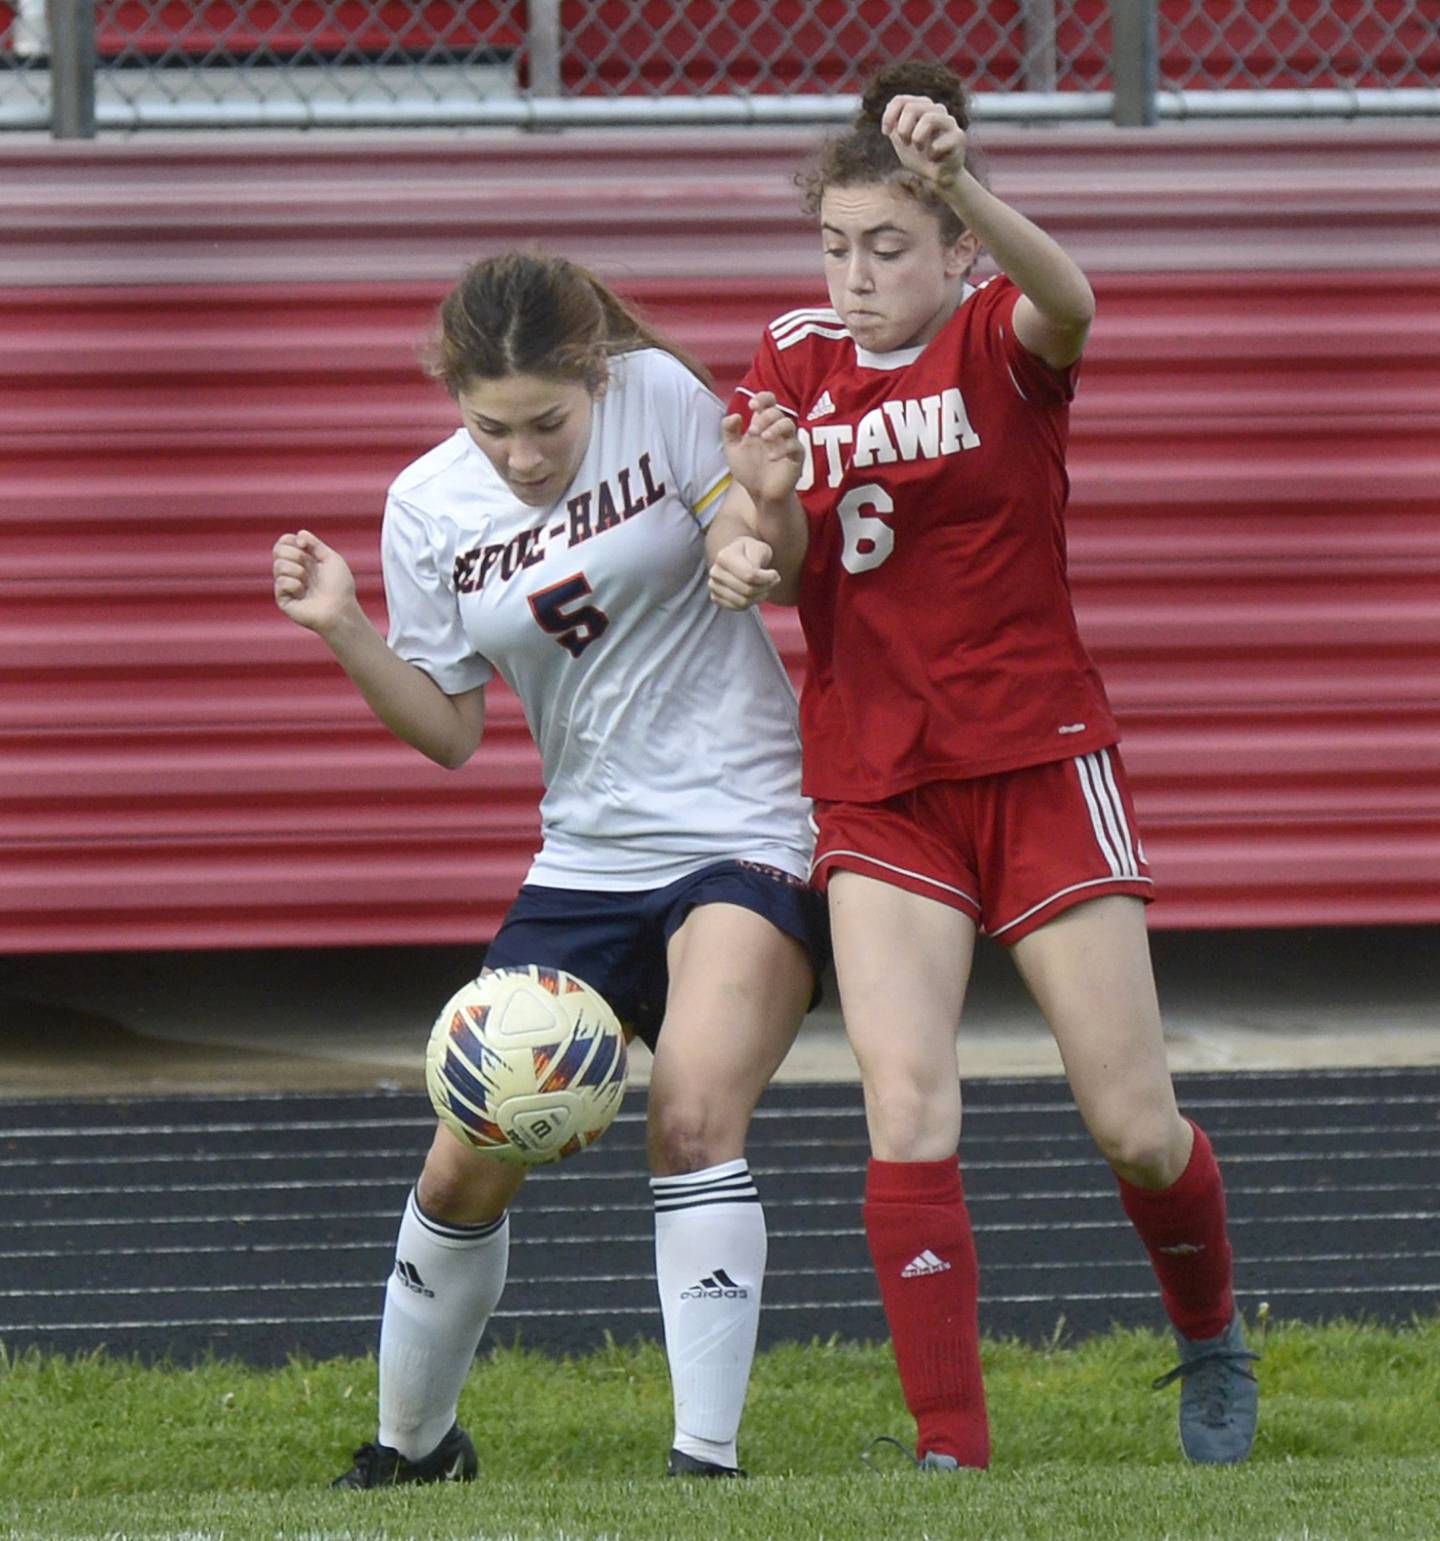 Ottawa’s Kindley Moore (6) and DePue/Hall’s Veronica Fitzgerald (5) fight for control of the ball during their match Thursday at Ottawa.